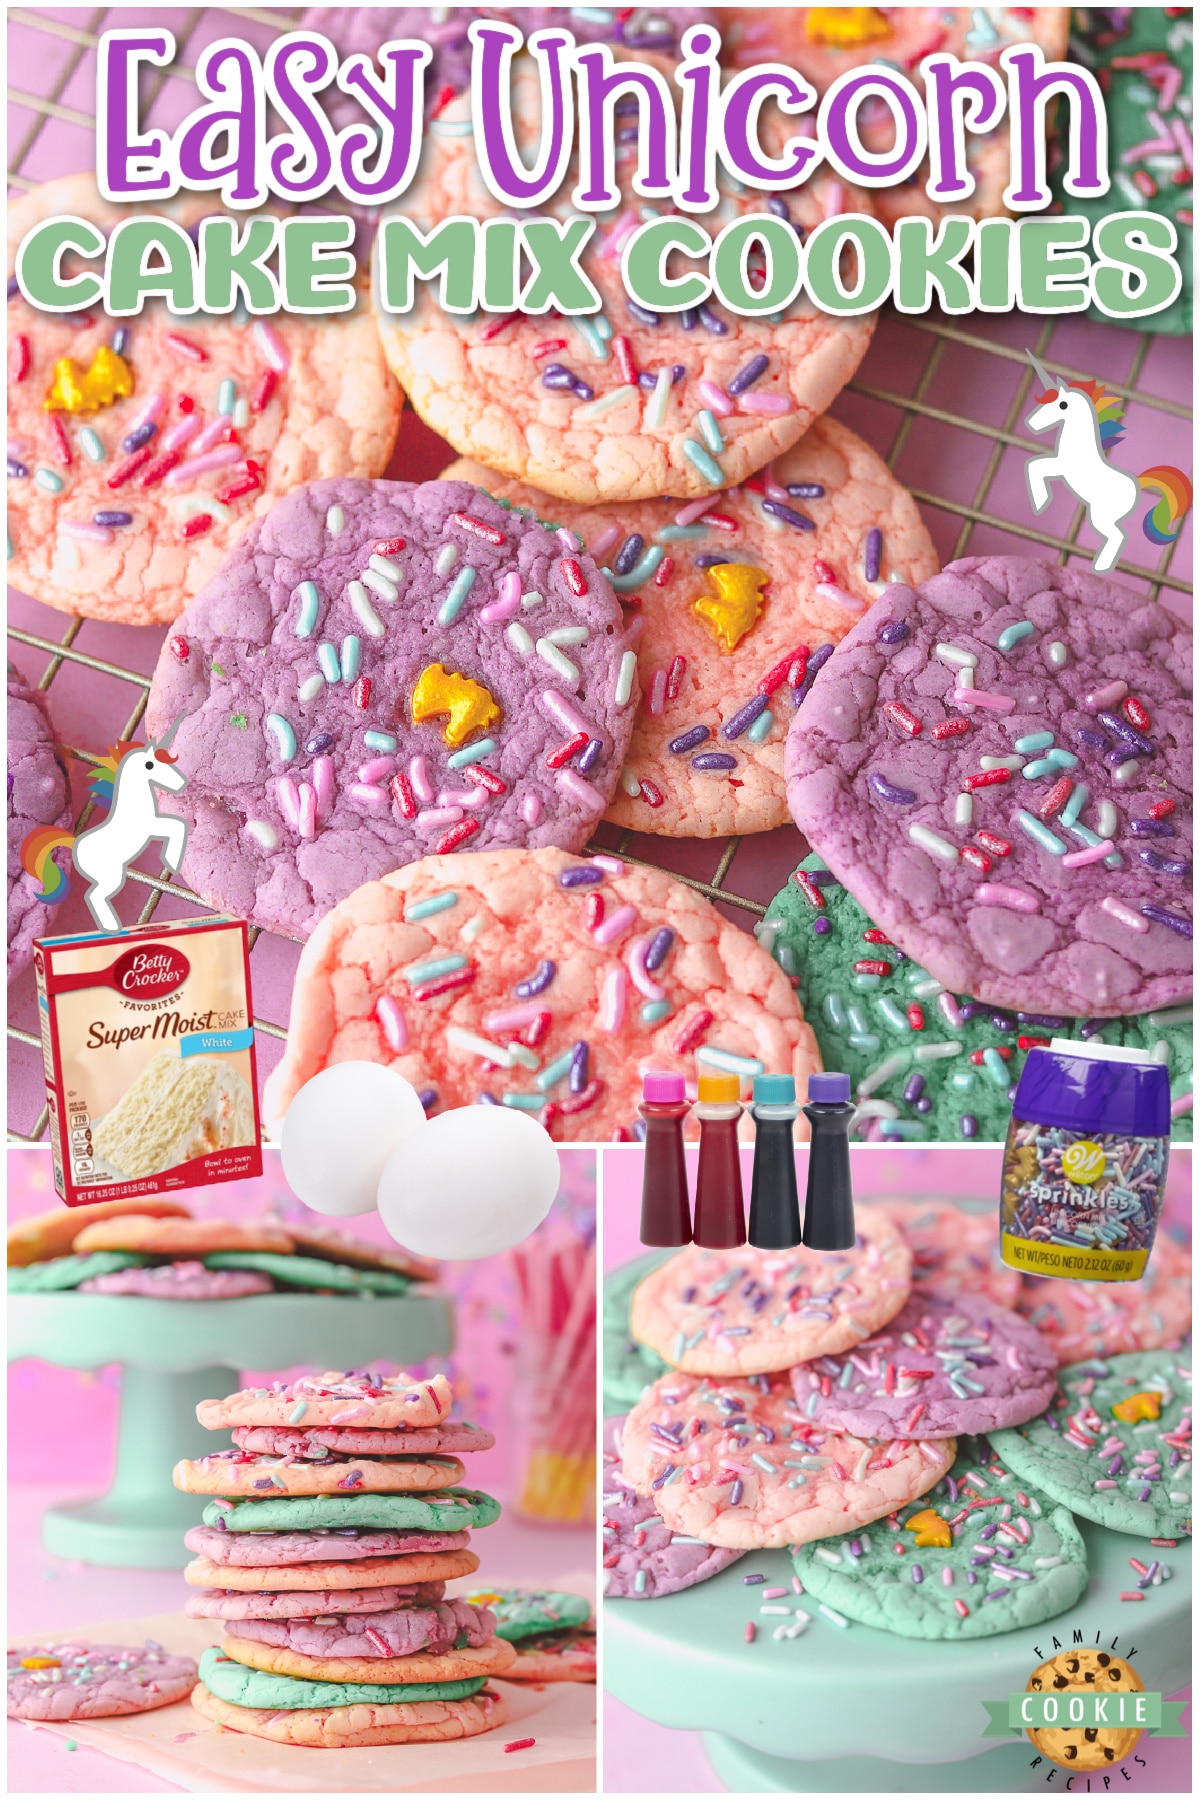 Easy Unicorn Cookies made with cake mix, eggs, oil & sprinkles! Fun, colorful cake mix cookie recipe with a unicorn inspired theme perfect for birthday parties!